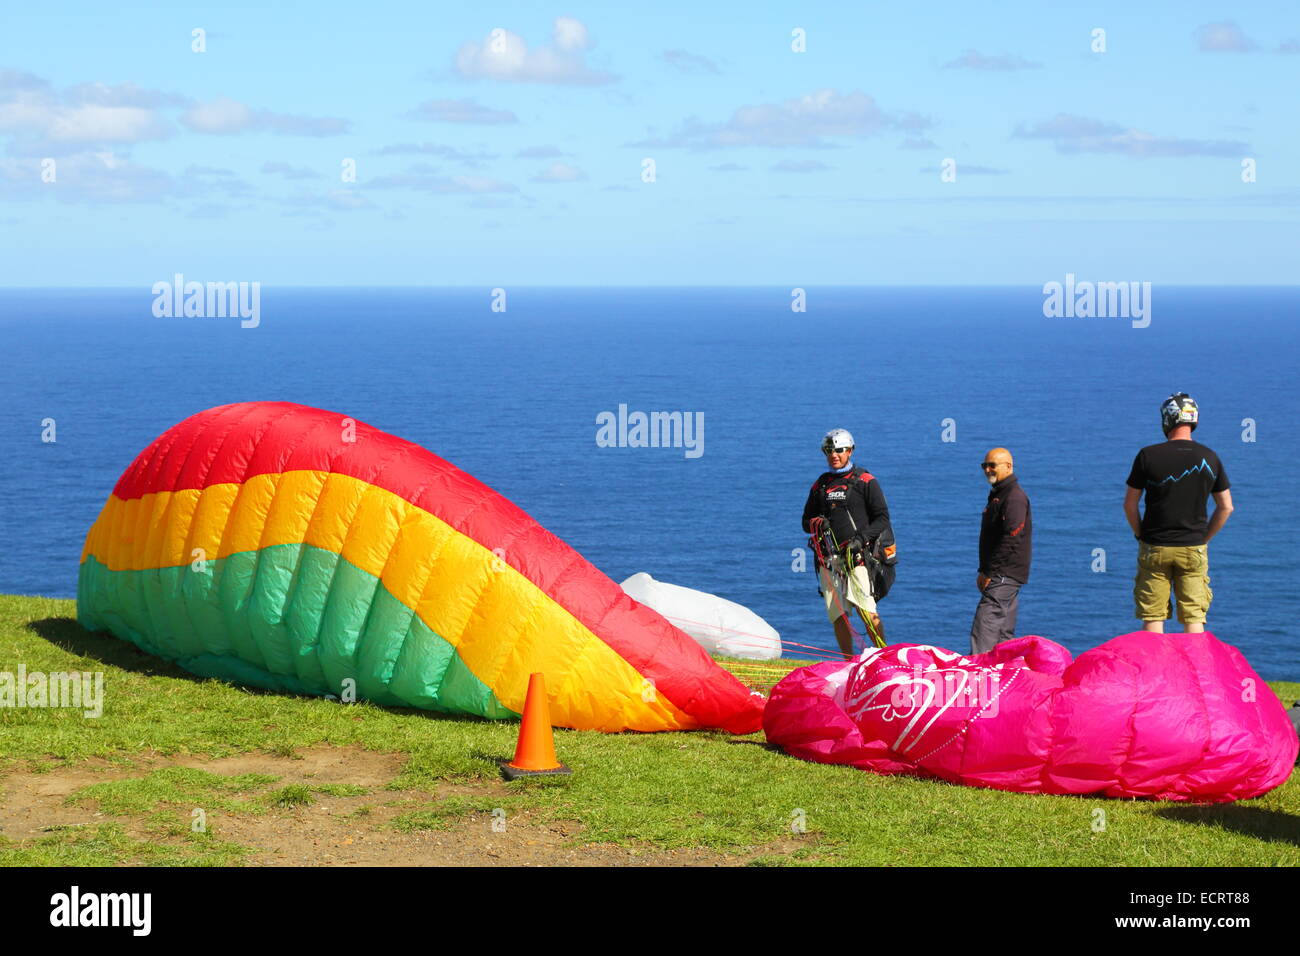 Men preparing paragliders to soar over the Pacific Ocean off Bald Hill, New South Wales, Australia. Stock Photo